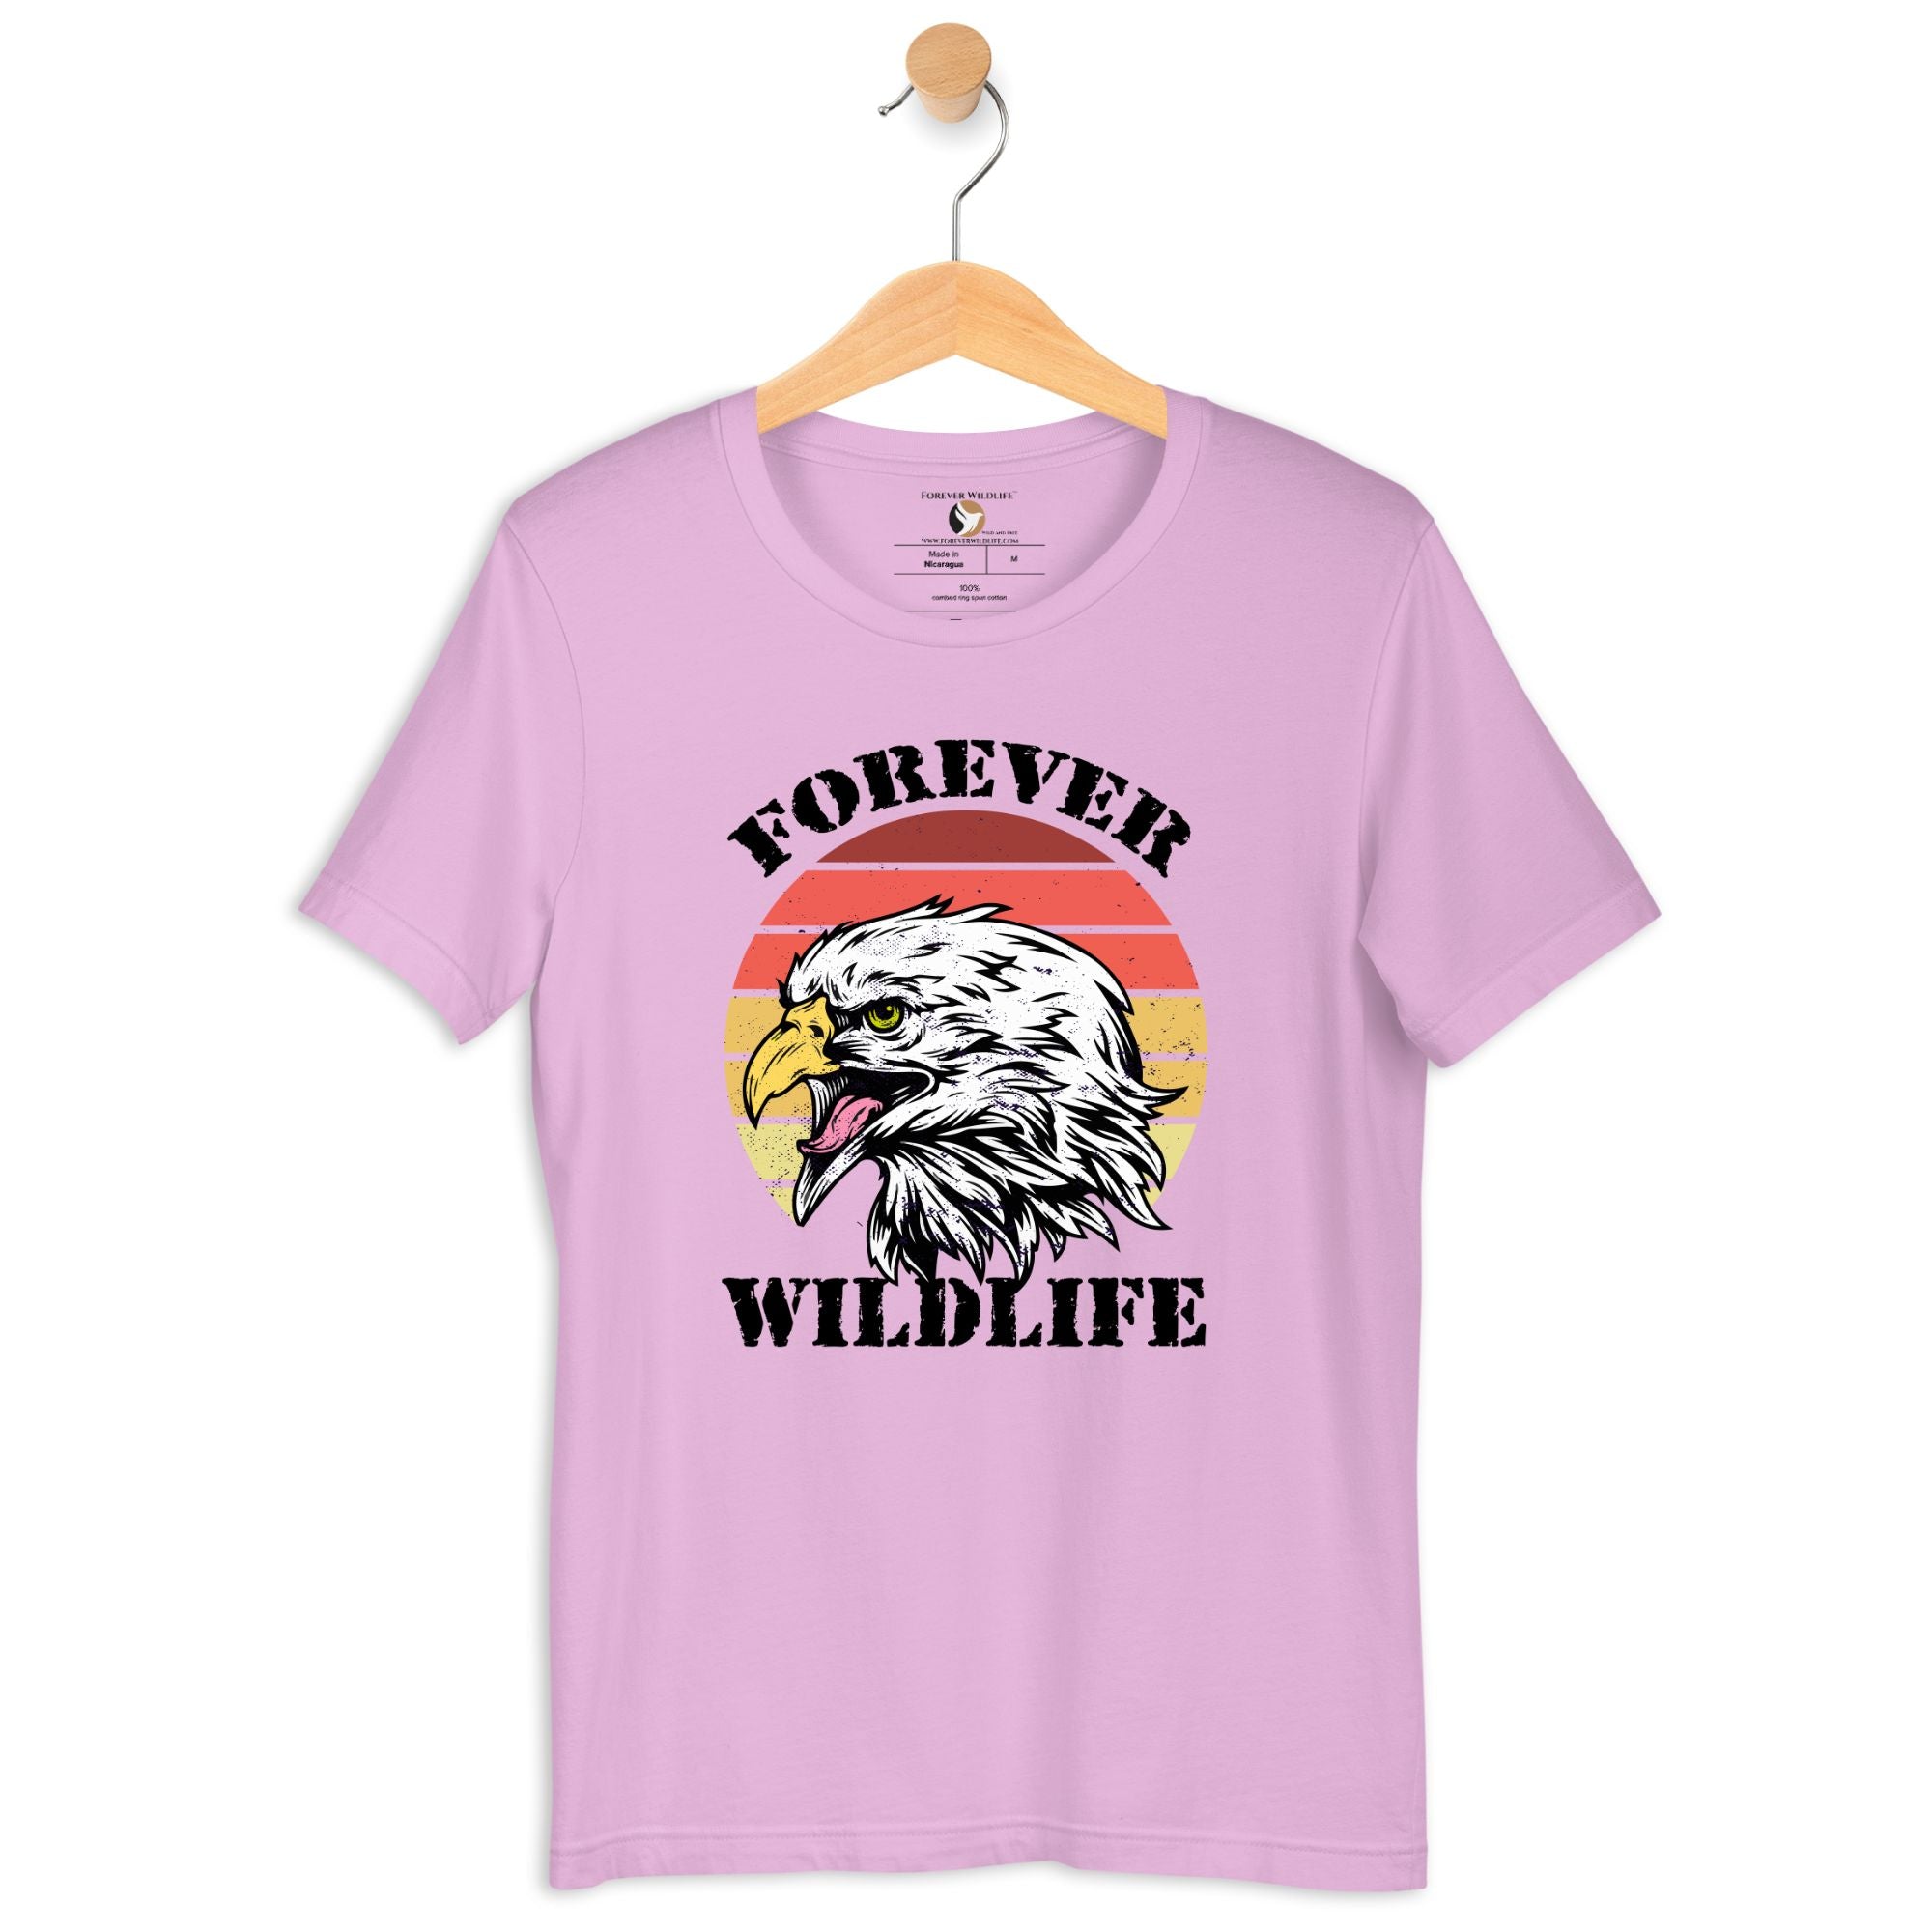 Eagle T-Shirt in Lilac – Premium Wildlife T-Shirt Design, Eagle Shirts and Wildlife Clothing from Forever Wildlife